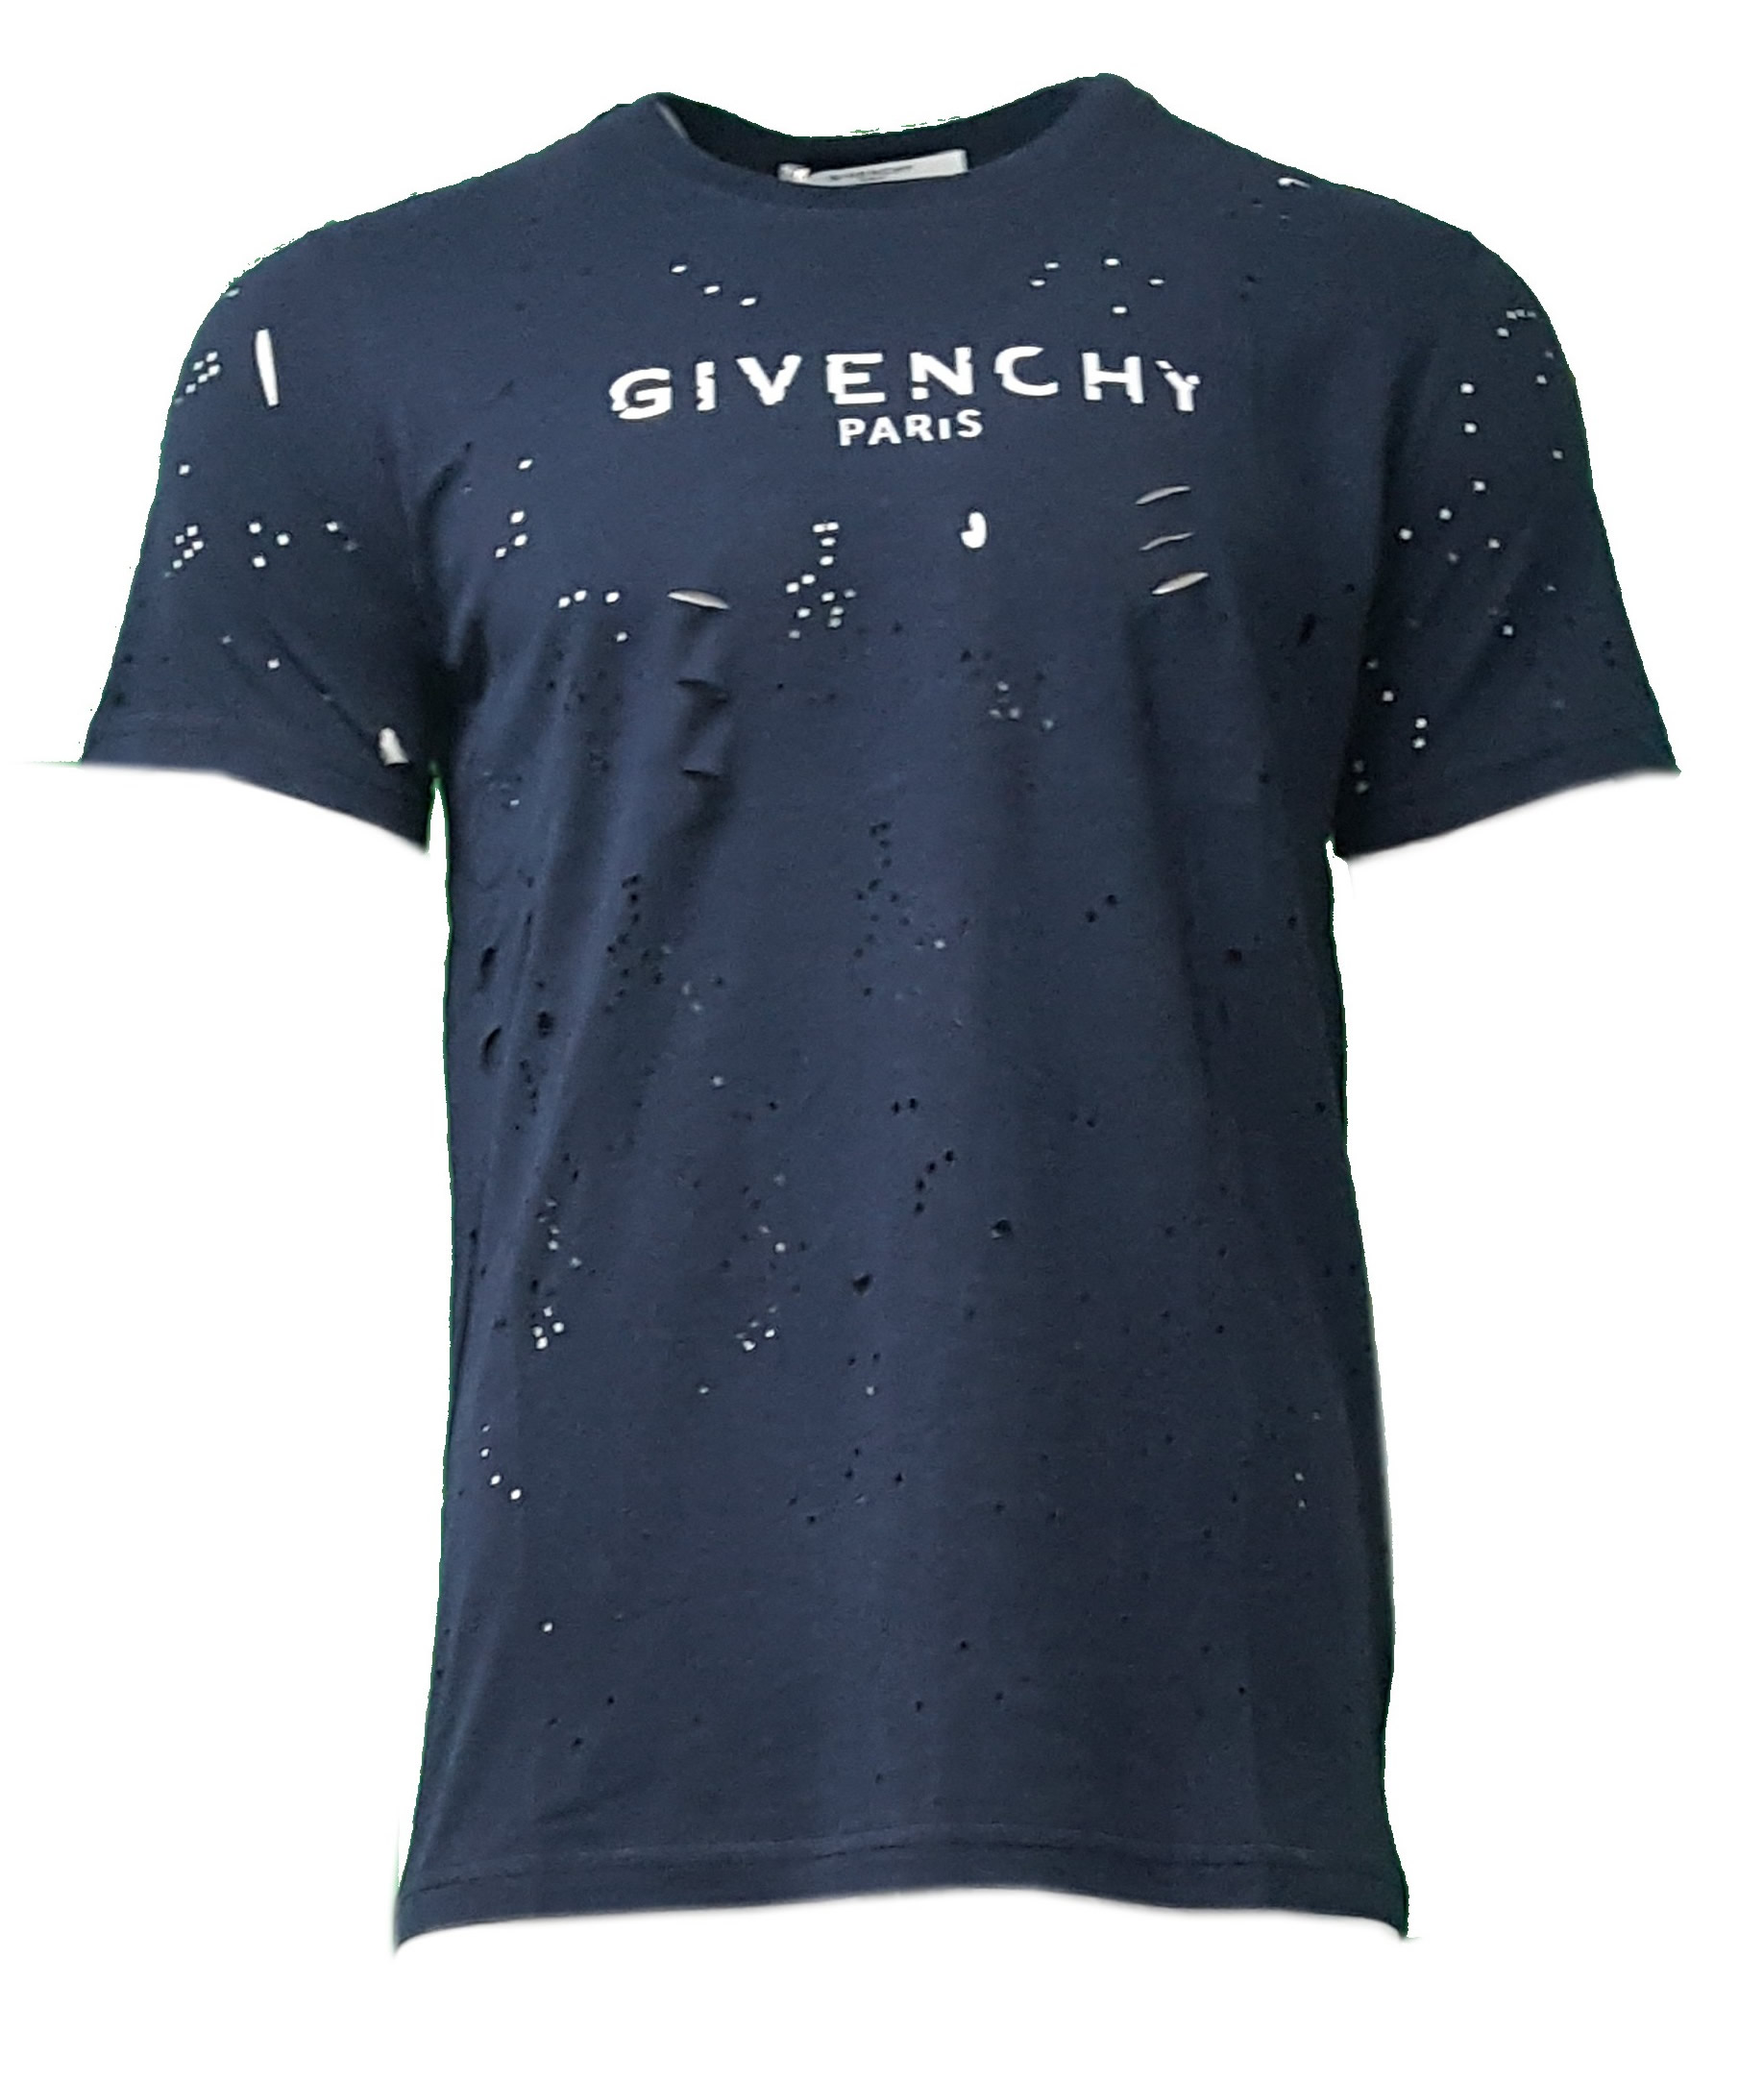 Givenchy Paris Short Sleeve Crew T Shirt. Destroyed Print in Navy ...